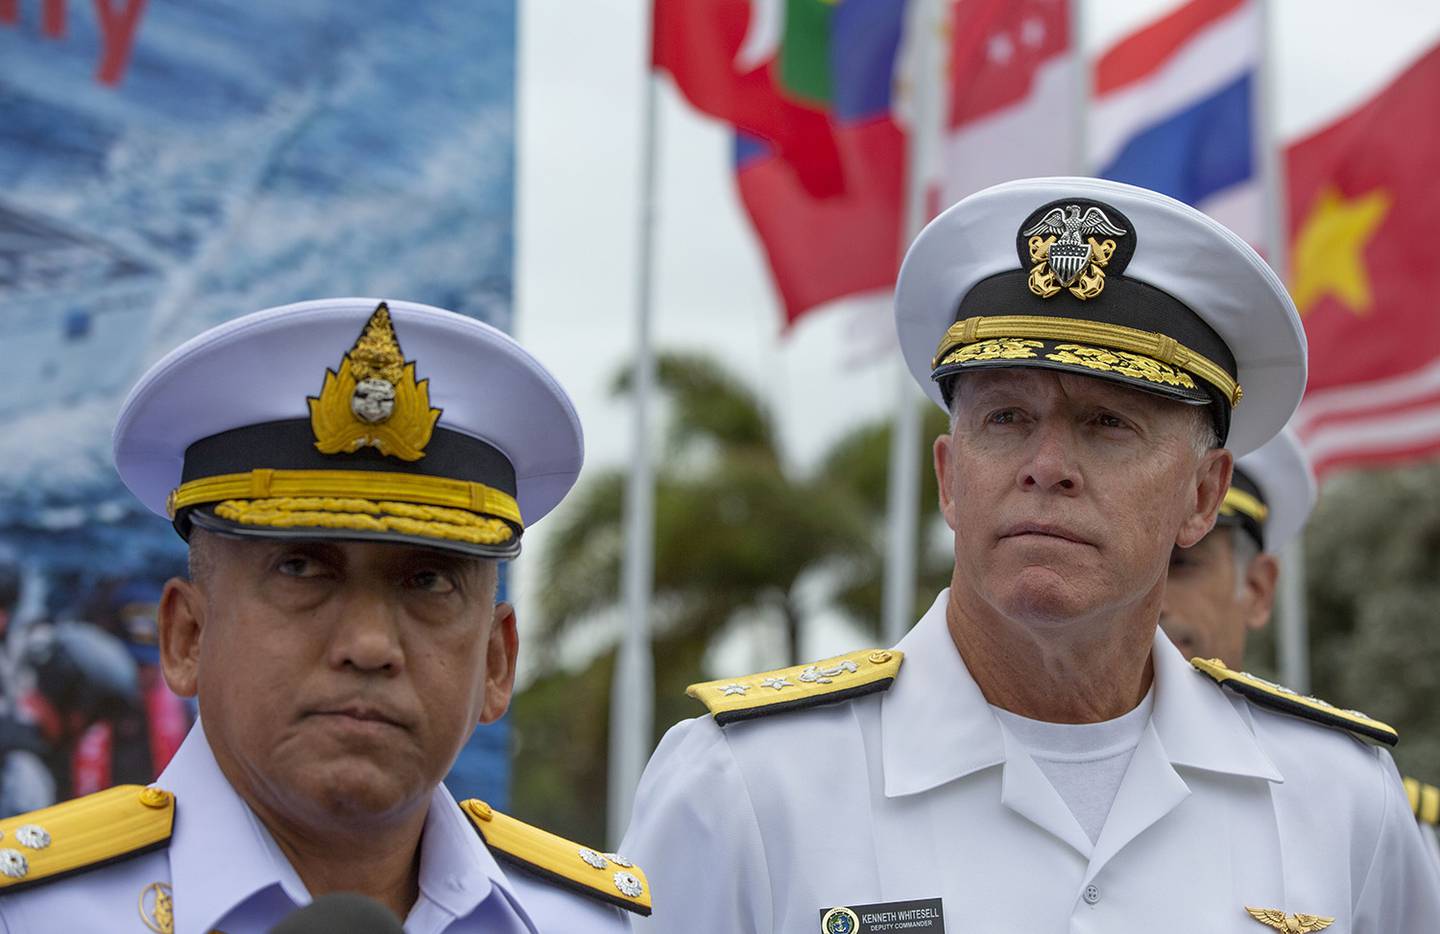 Vice Adm. Charoenpol Khumrasri, of Royal Thai Navy, left and Rear Adm. Kenneth Whitesell, of the U.S. Navy, participate in the inauguration ceremony of ASEAN-U.S. Maritime Exercise in Sattahip, Thailand, Monday, Sep. 2, 2019.